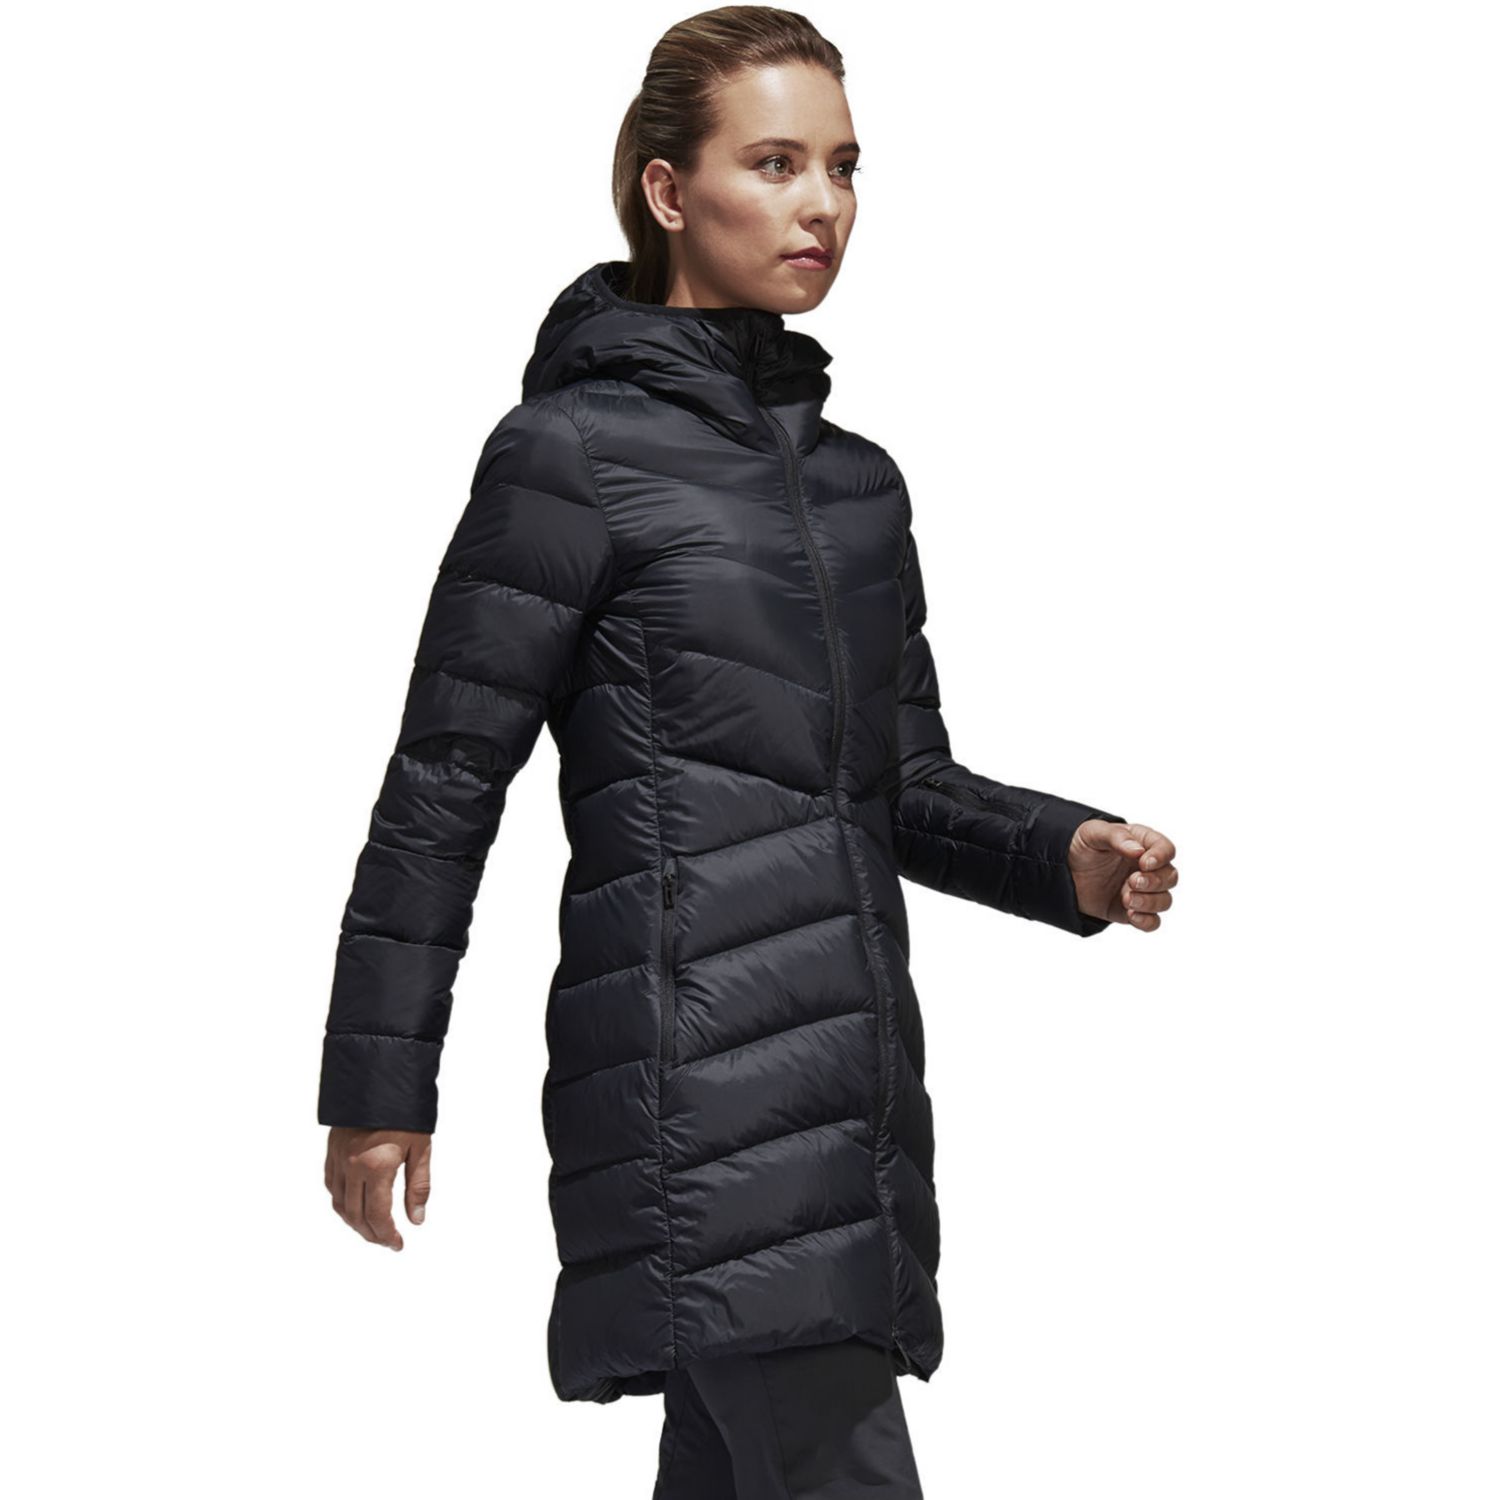 Women's adidas Outdoor Nuvic Climawarm 